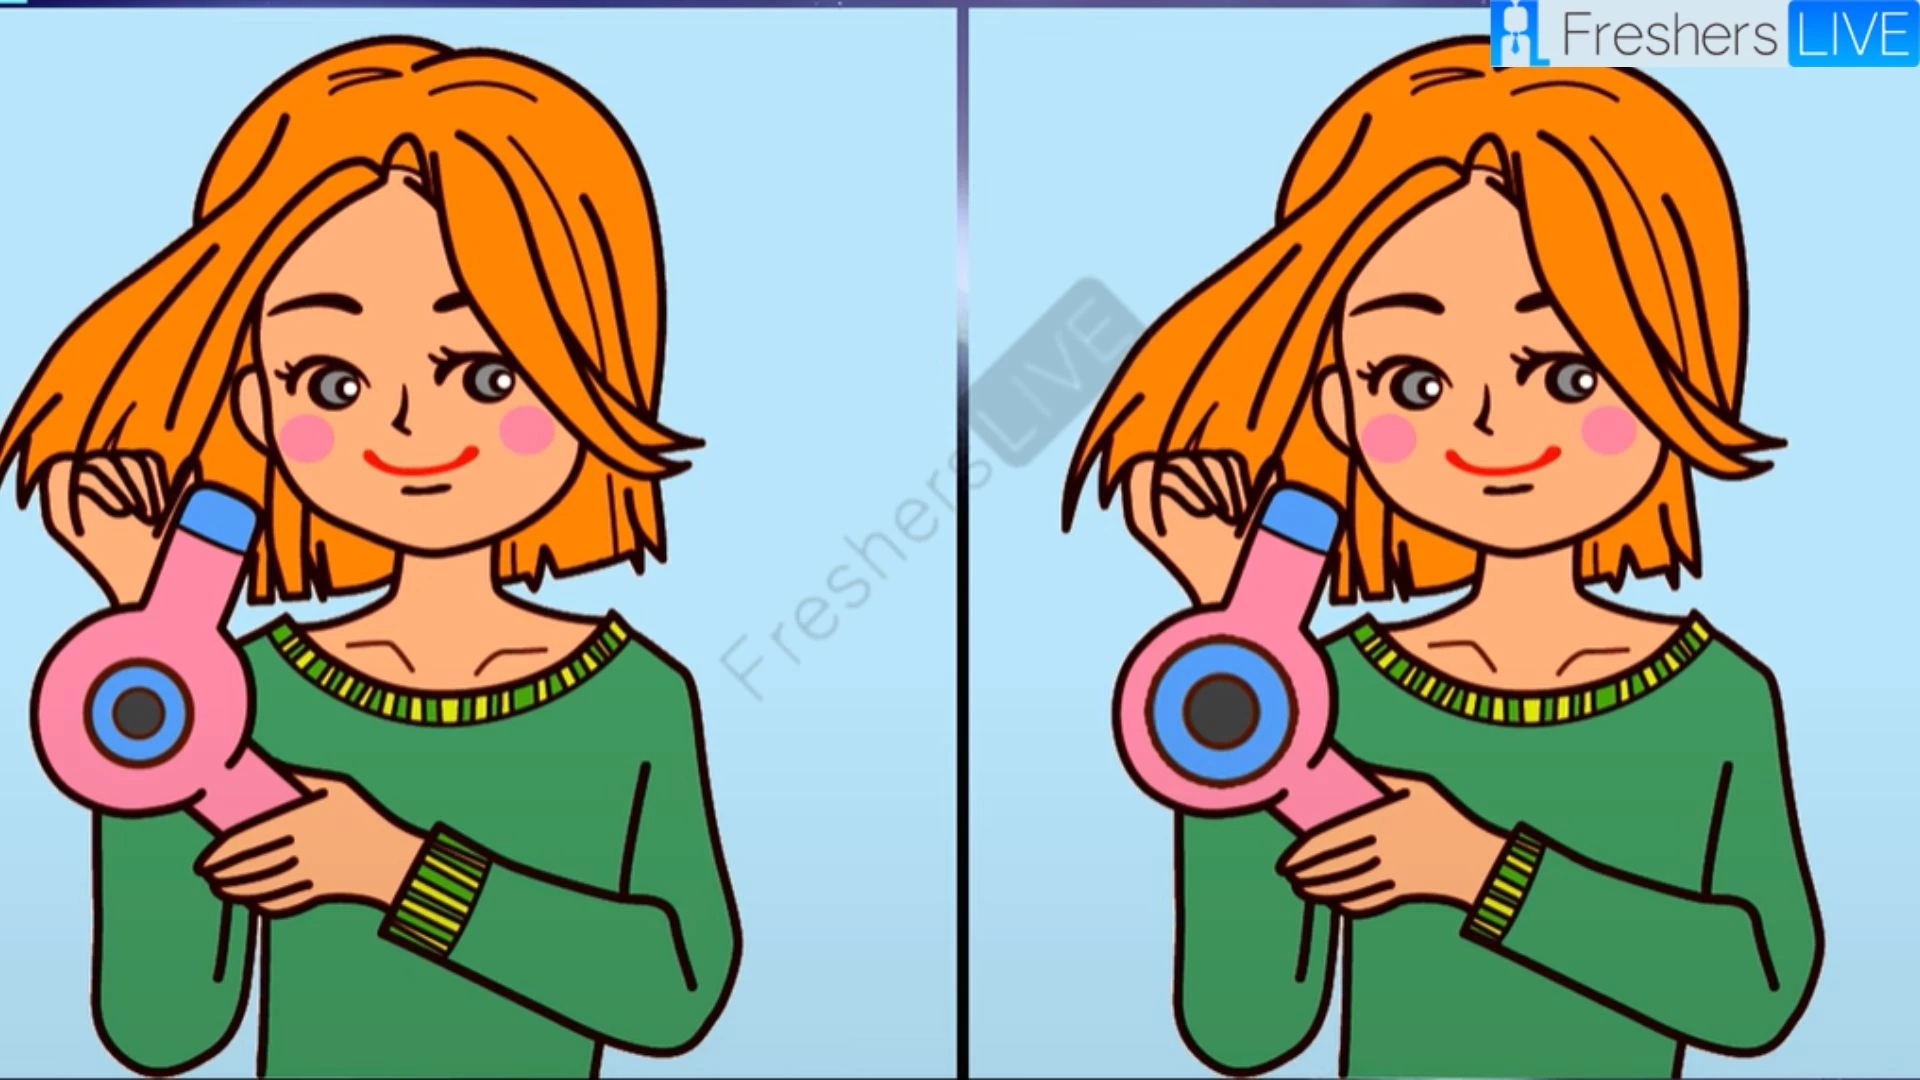 Spot 3 differences between the two lady pictures in 10 seconds!